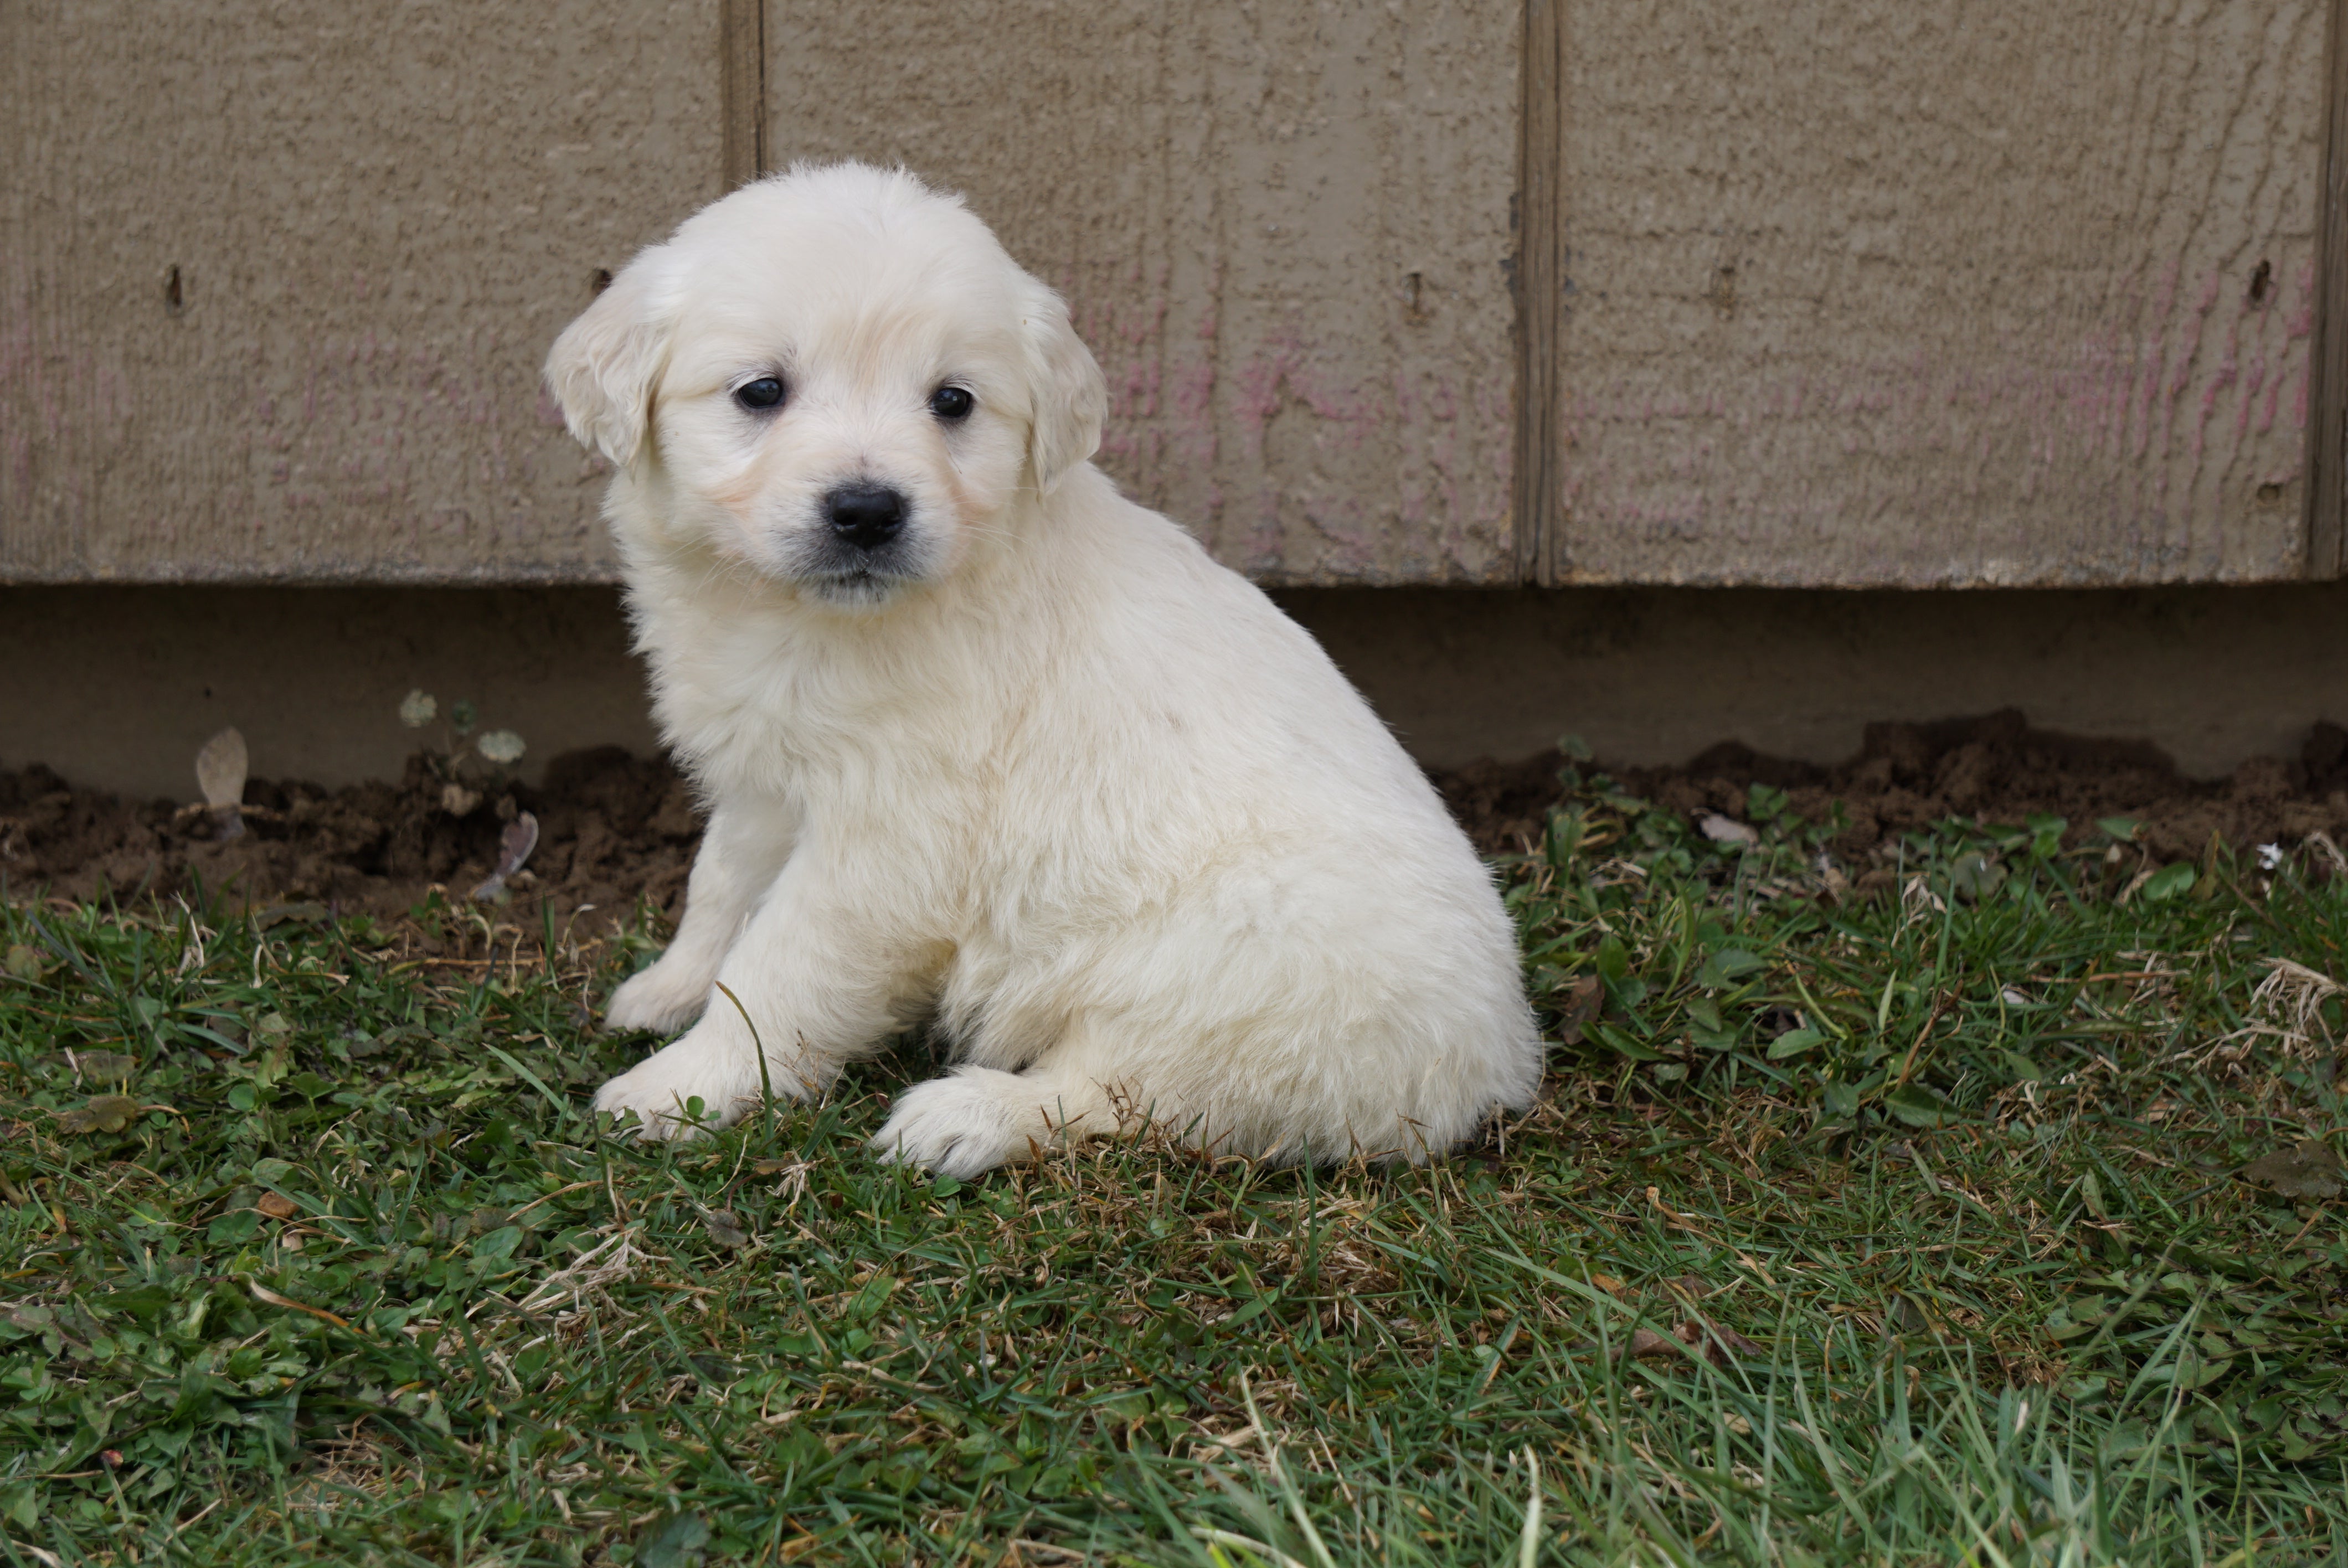 30 HQ Images English Golden Retriever Puppies Ohio - Georgia : English Golden Retriever puppy for sale near ...